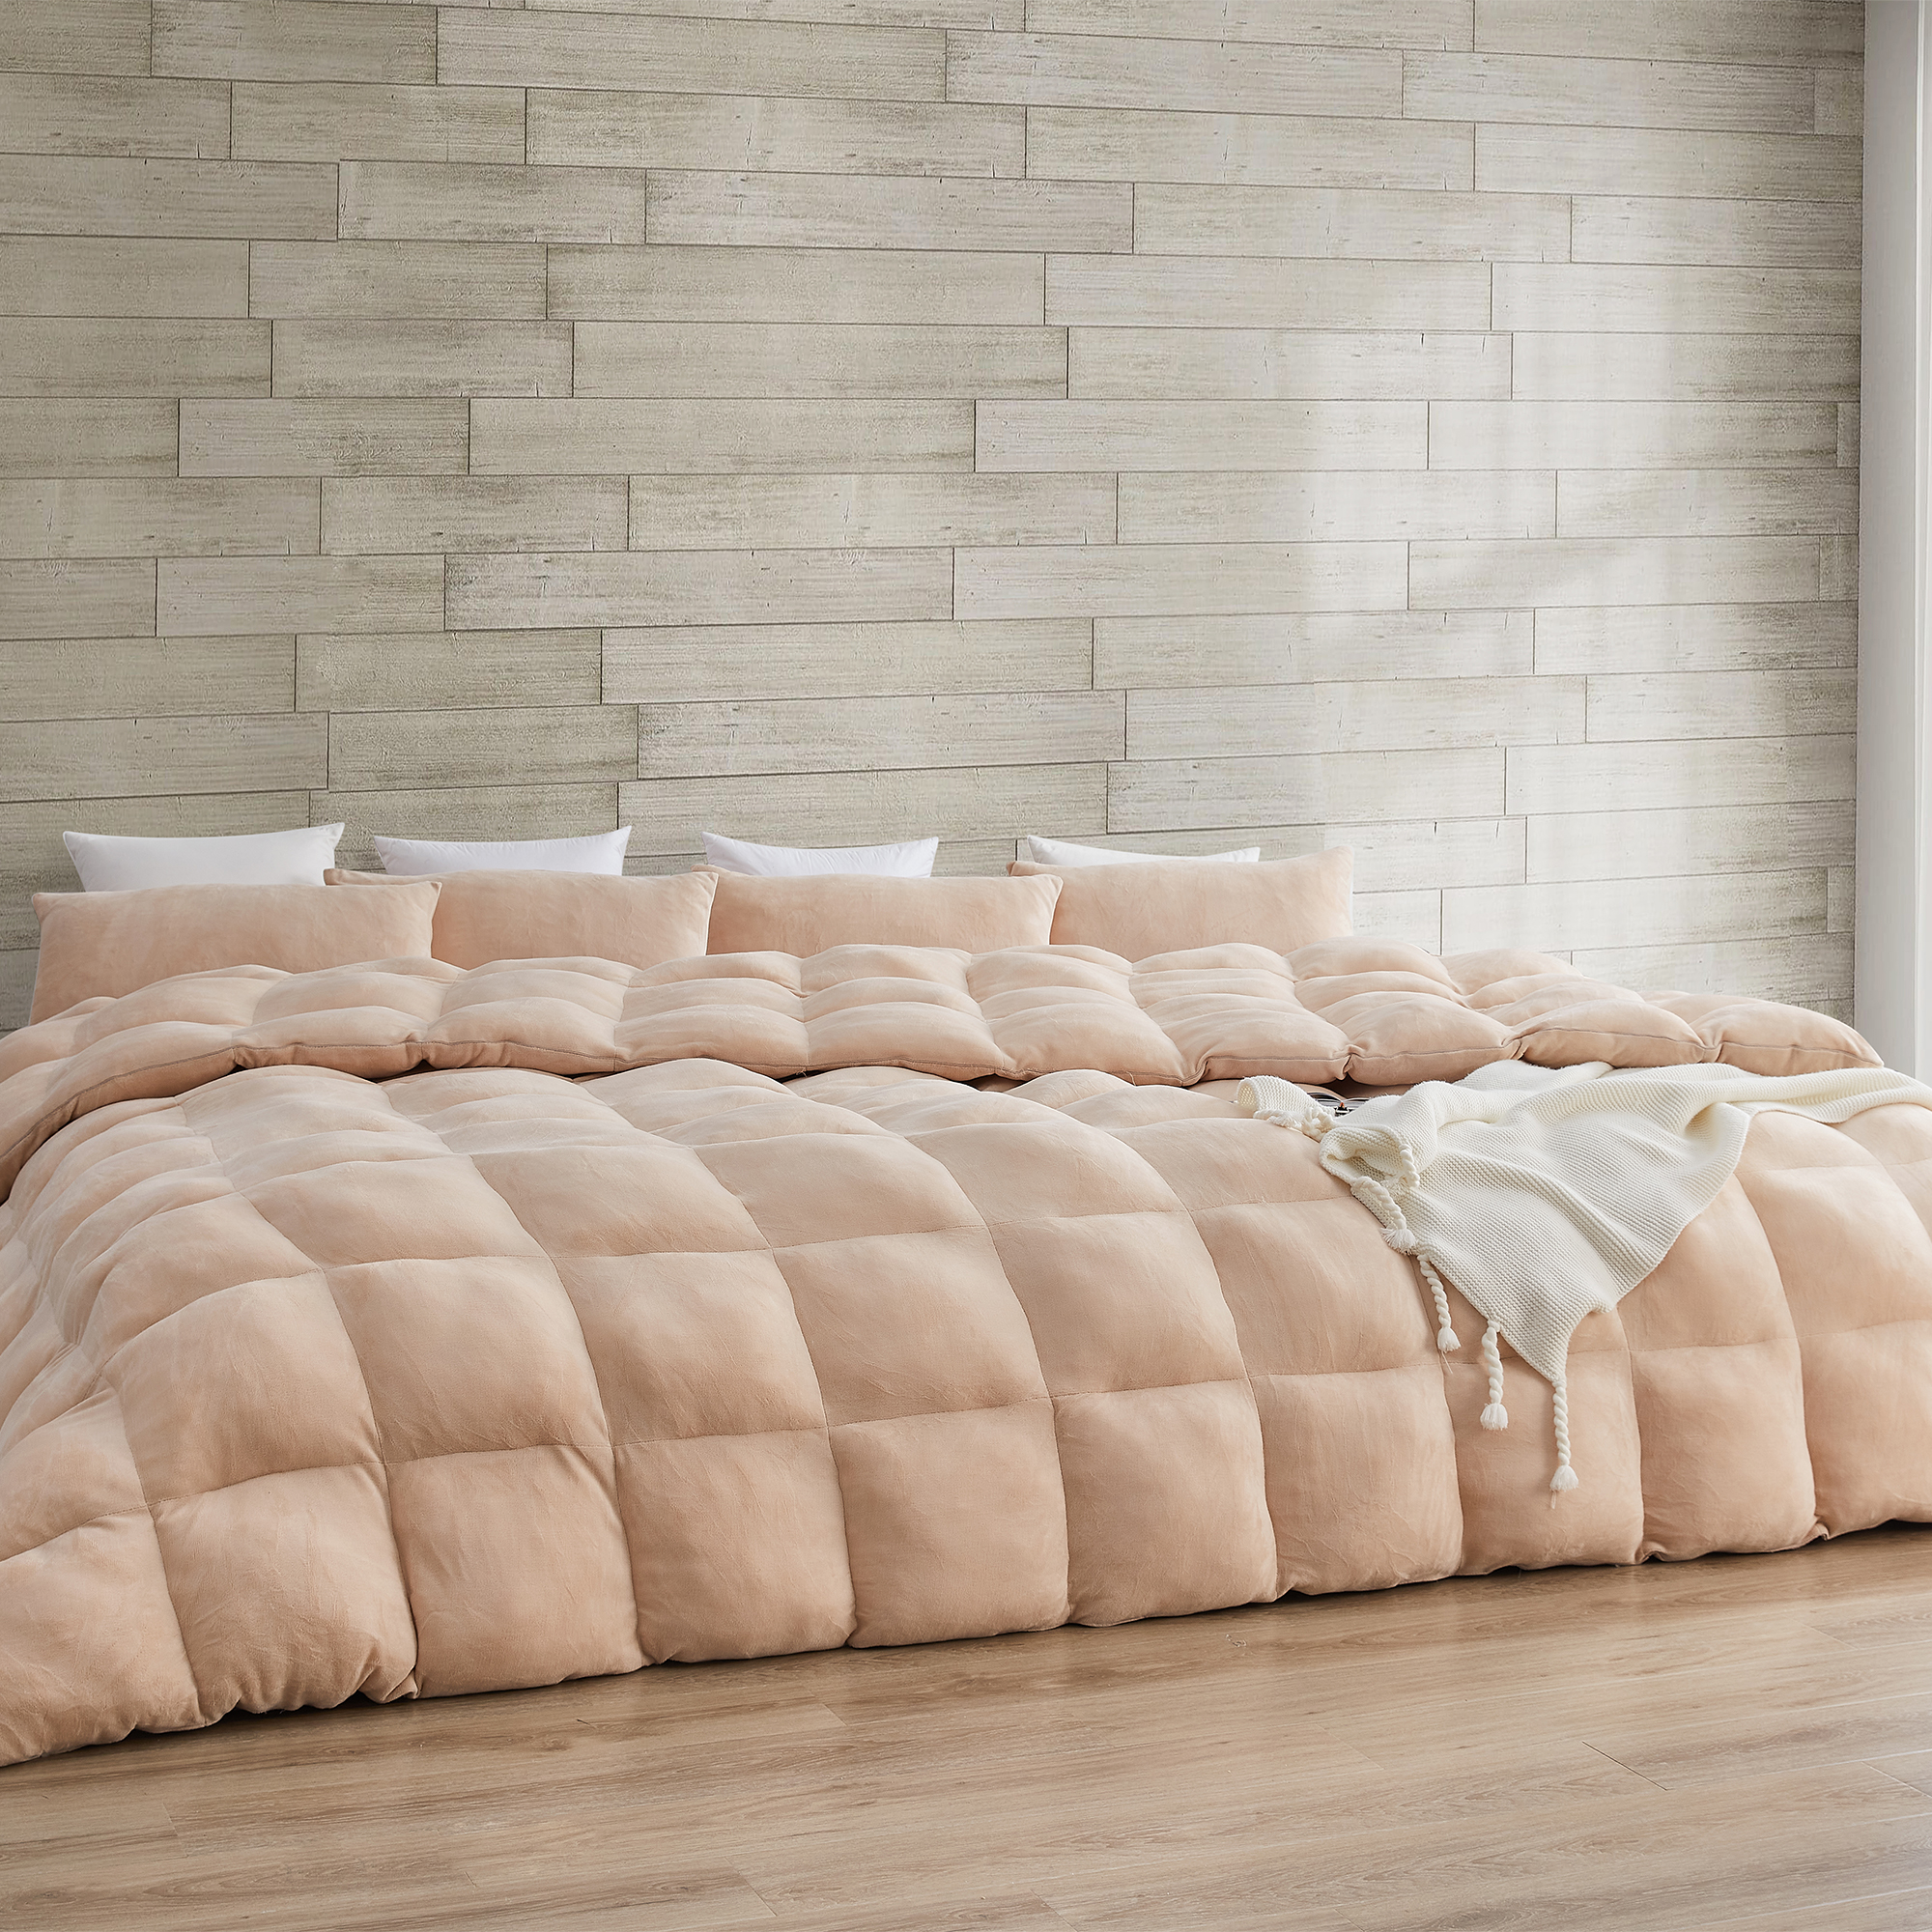 Dam Boi He Thick - Coma Inducer Comforter - Almond Taupe